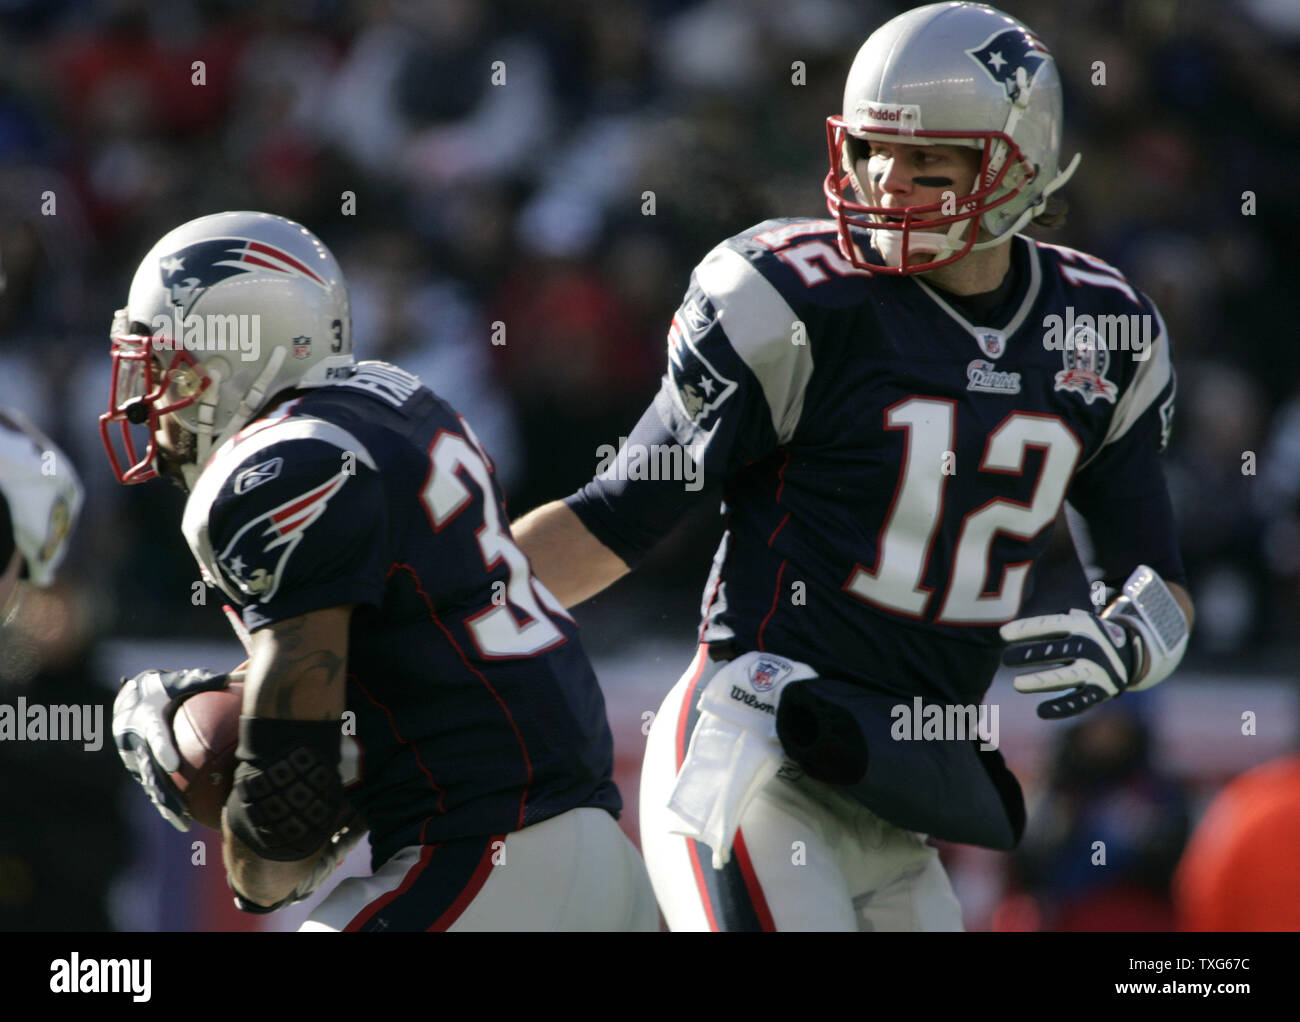 New England Patriots quarterback Tom Brady (12) hands off to Kevin Faulk (33) in the first quarter of the AFC Wildcard game against the New England Patriots at Gillette Stadium in Foxboro, Massachusetts on January 10, 2010.    UPI/Matthew Healey Stock Photo